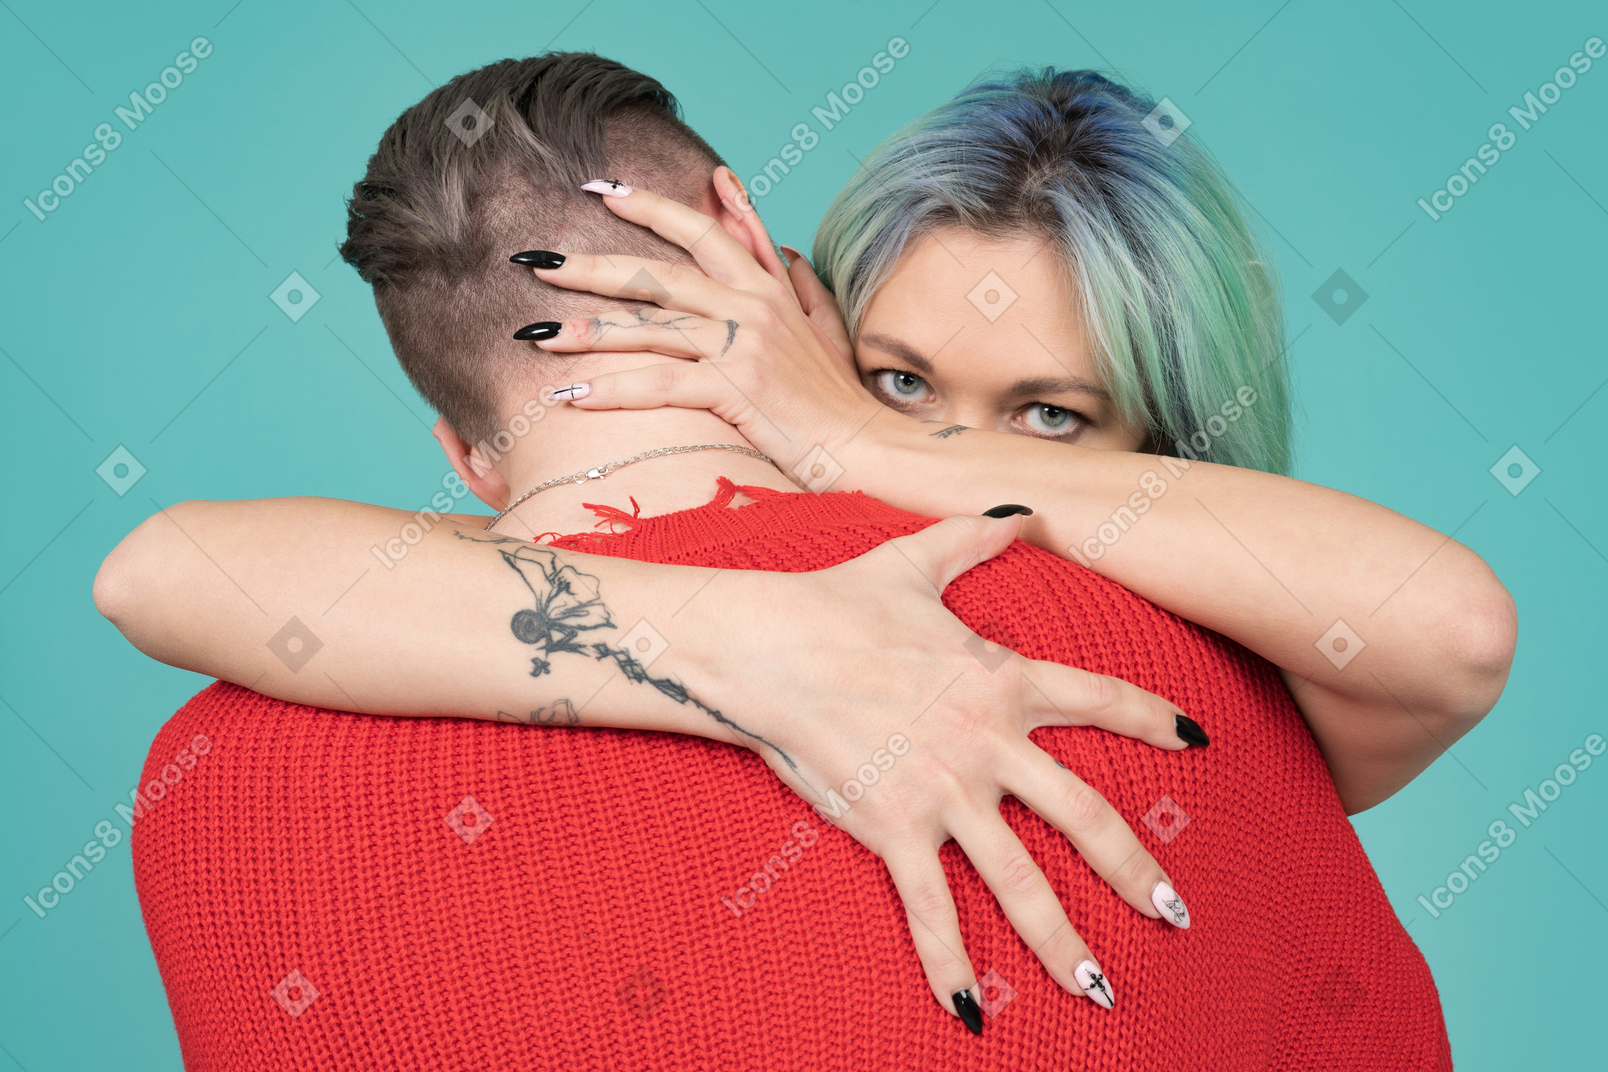 Turquoise haired young woman hugging her man and facing camera